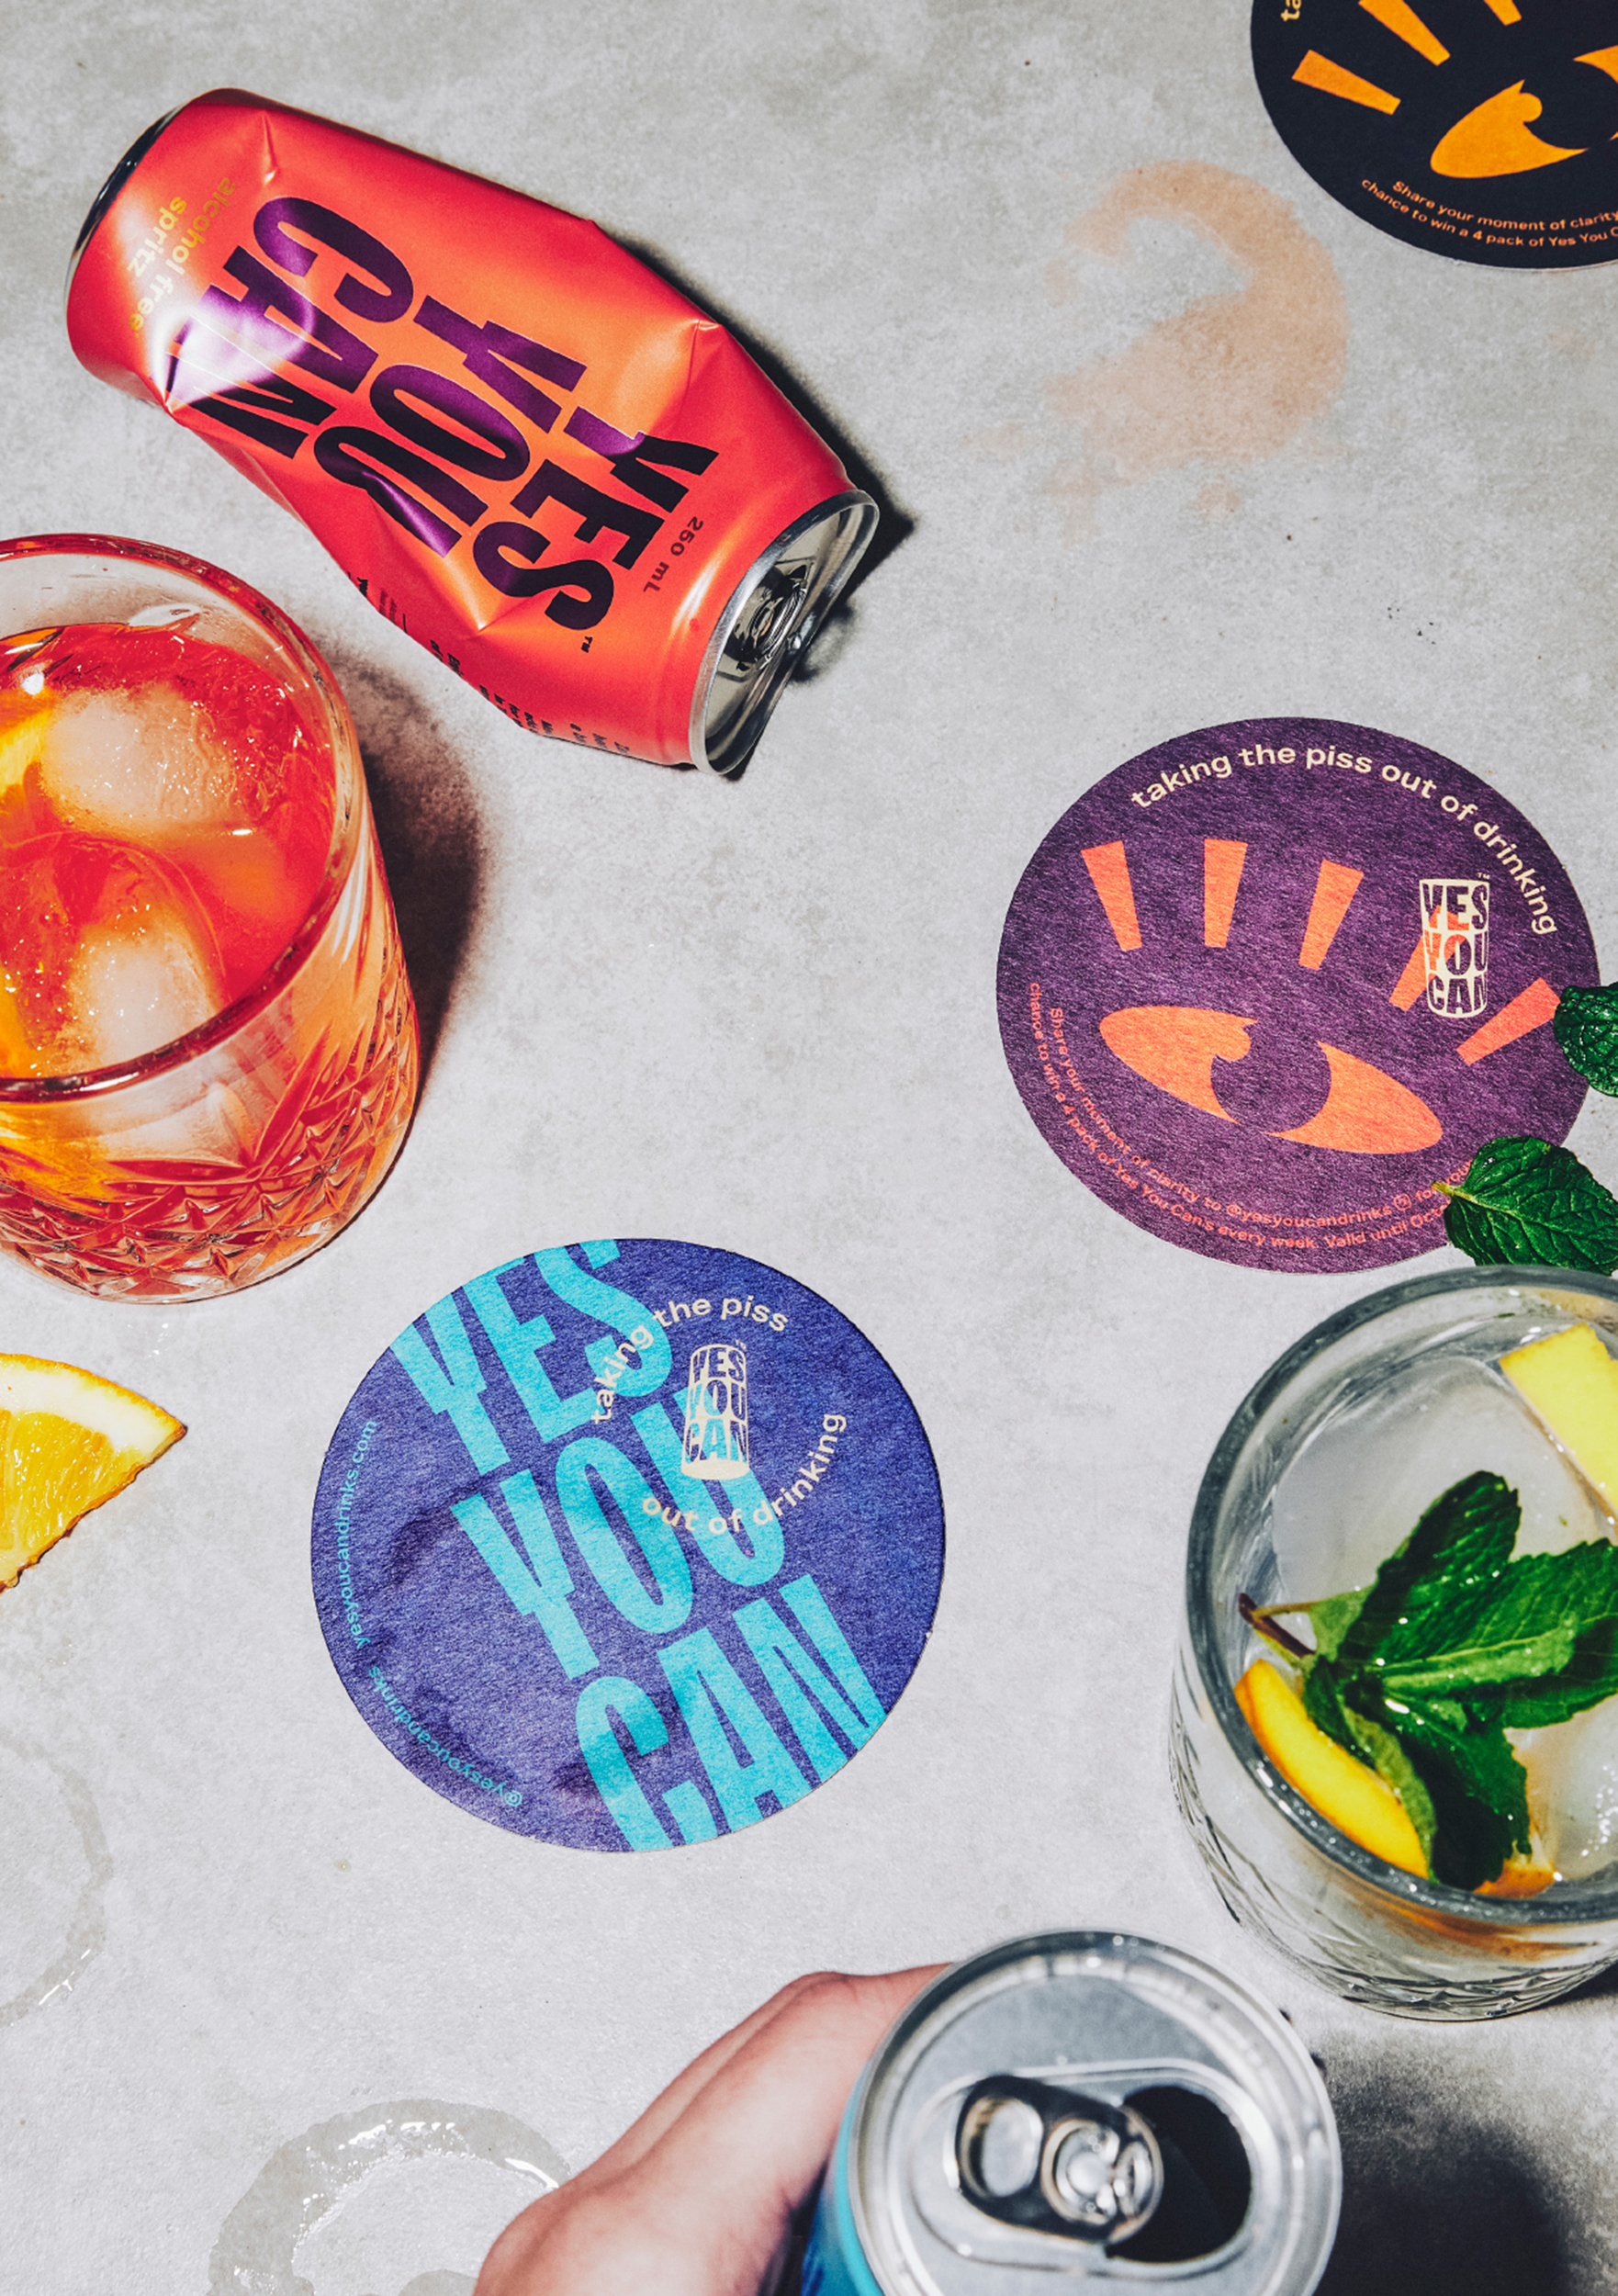 Brand identity and photography for non-alcoholic ready-to-drink range Yes You Can by Marx Design